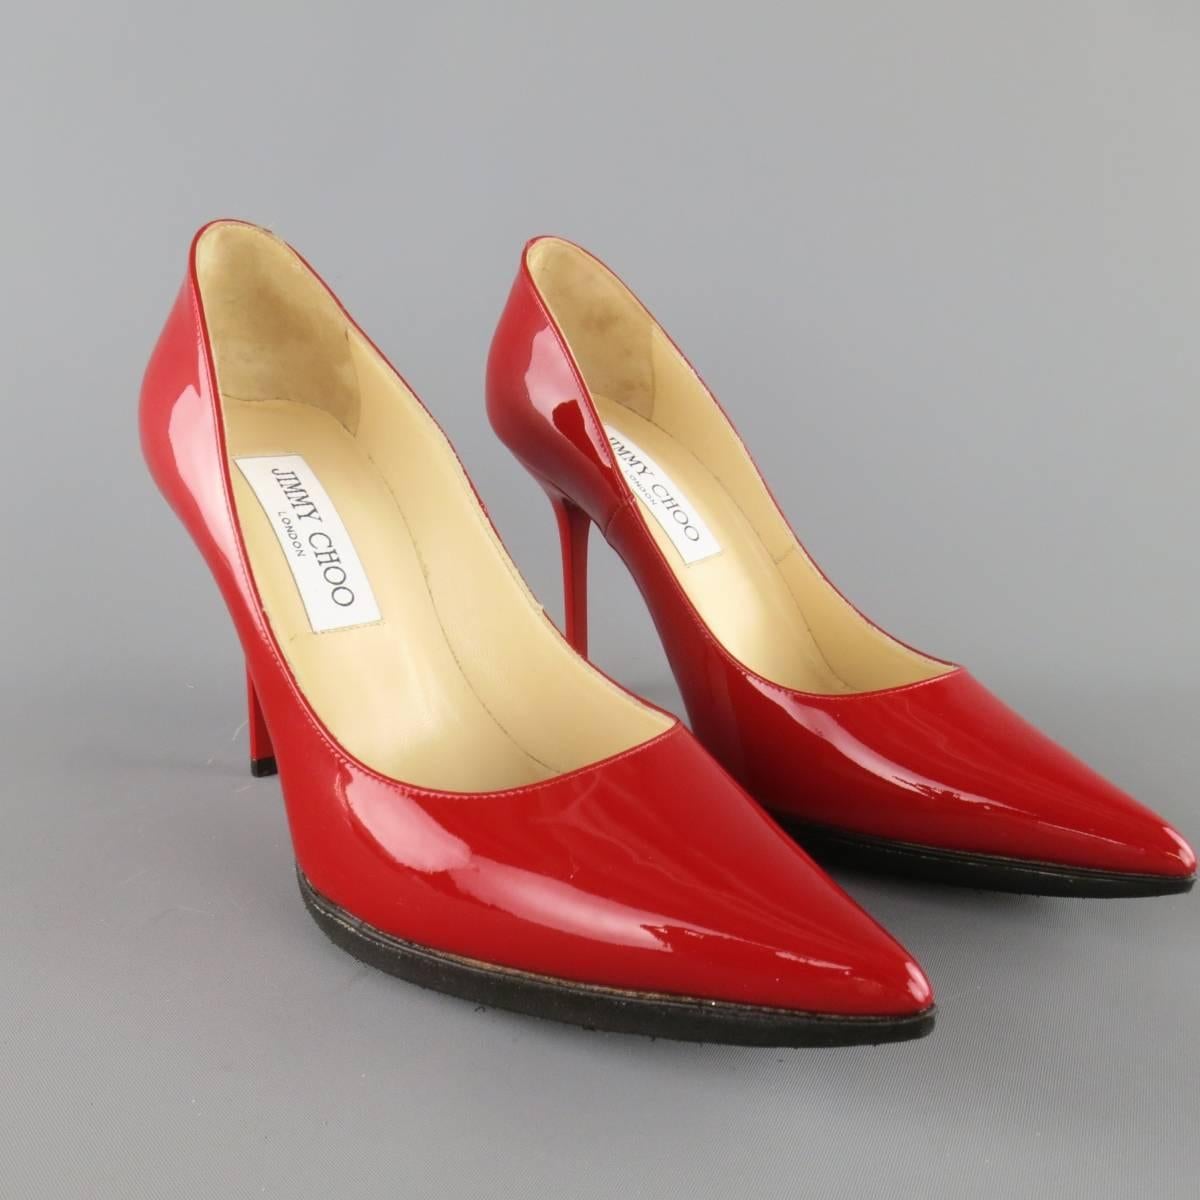 Classic JIMMY CHOO pumps come in red patent leather and feature a pointed toe and lacquered stiletto heel. Thick black rubber sole added. As-Is. Made in Italy.
 
Excellent Pre-Owned Condition.
Marked: IT 35.5
 
Heel: 3.75 in.


Web ID: 83569 
